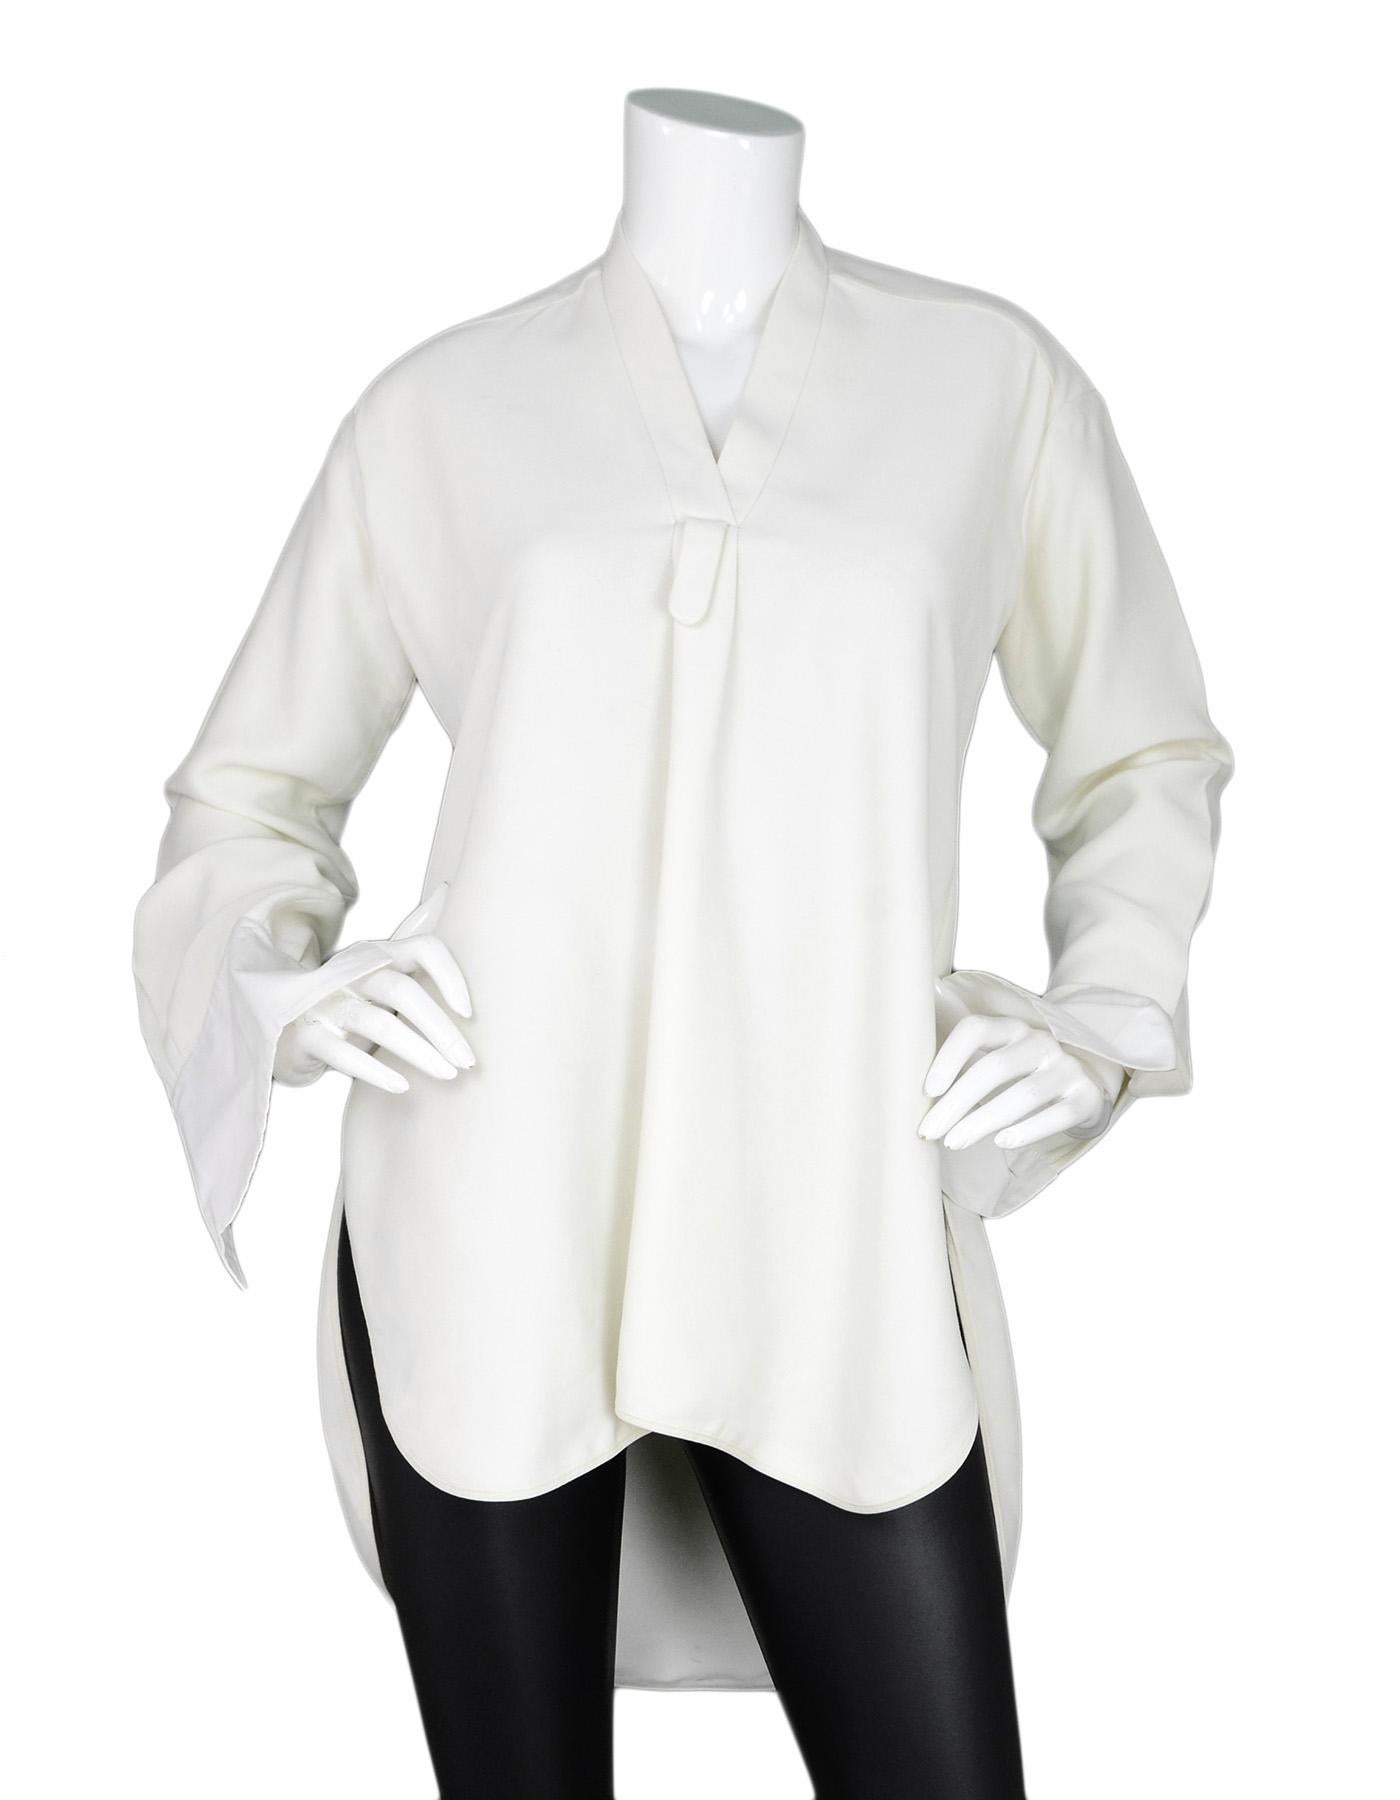 Celine Cream Longsleeve Tunic W/ V Cut Sz 34

Made In:  France
Color: Cream
Materials: Viscose and silk, composition tag is faded and hard to read percentages
Opening/Closure: Pull over 
Overall Condition: Very good pre-owned condition with minor